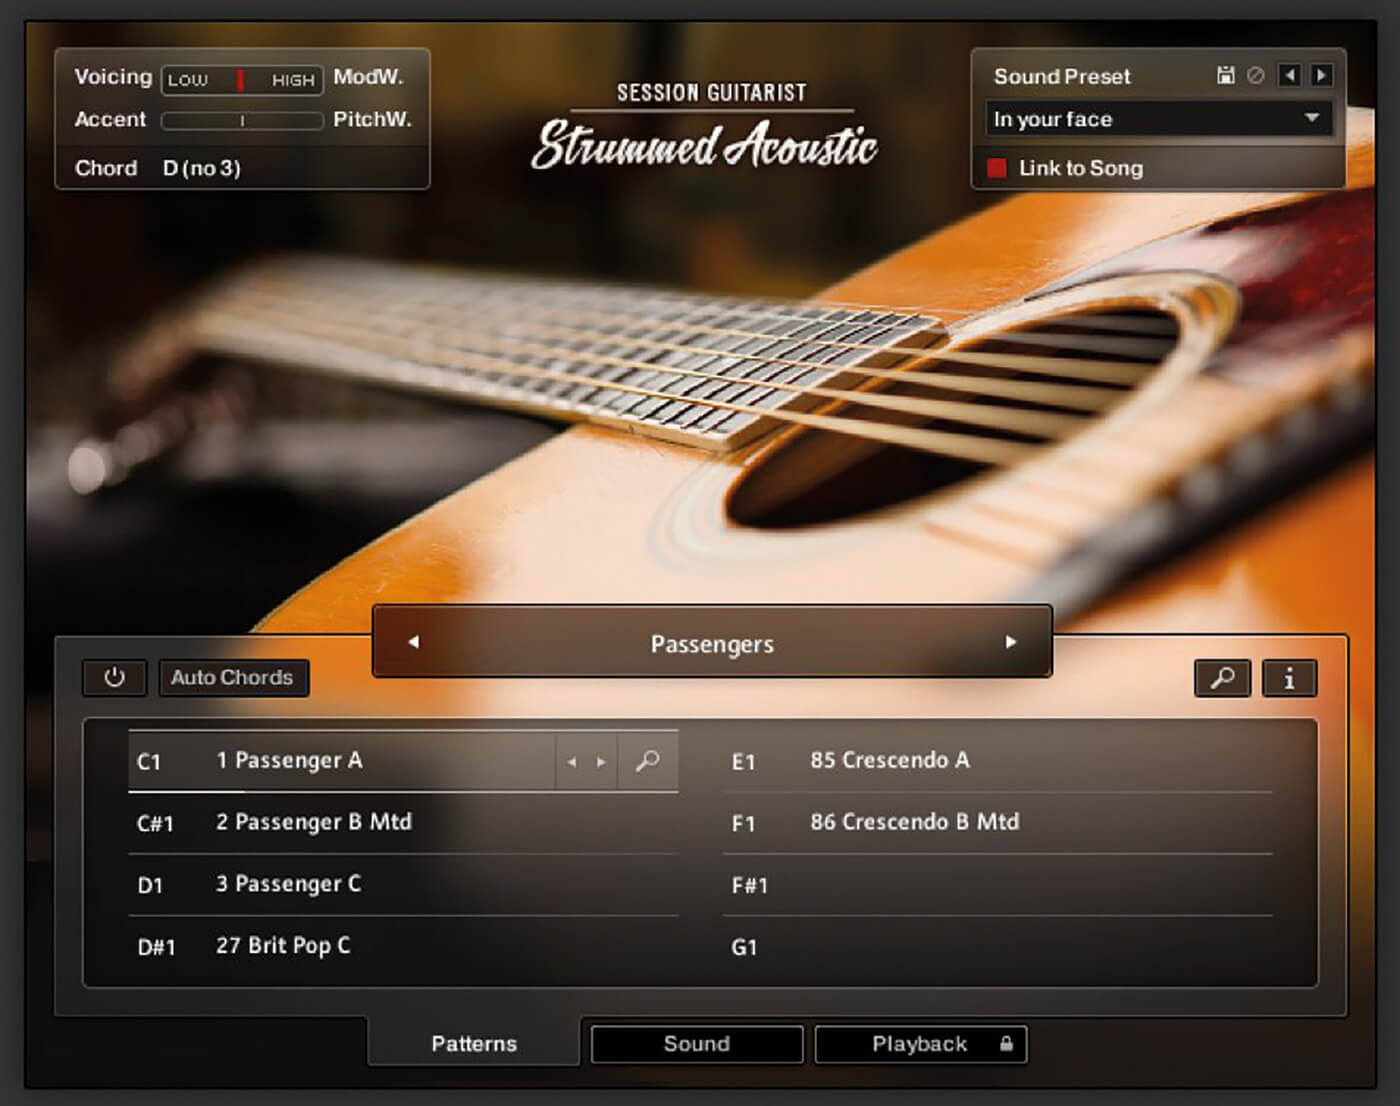 How to create a rock sound, Native Instruments Sessions Guitarist Strummed Acoustic